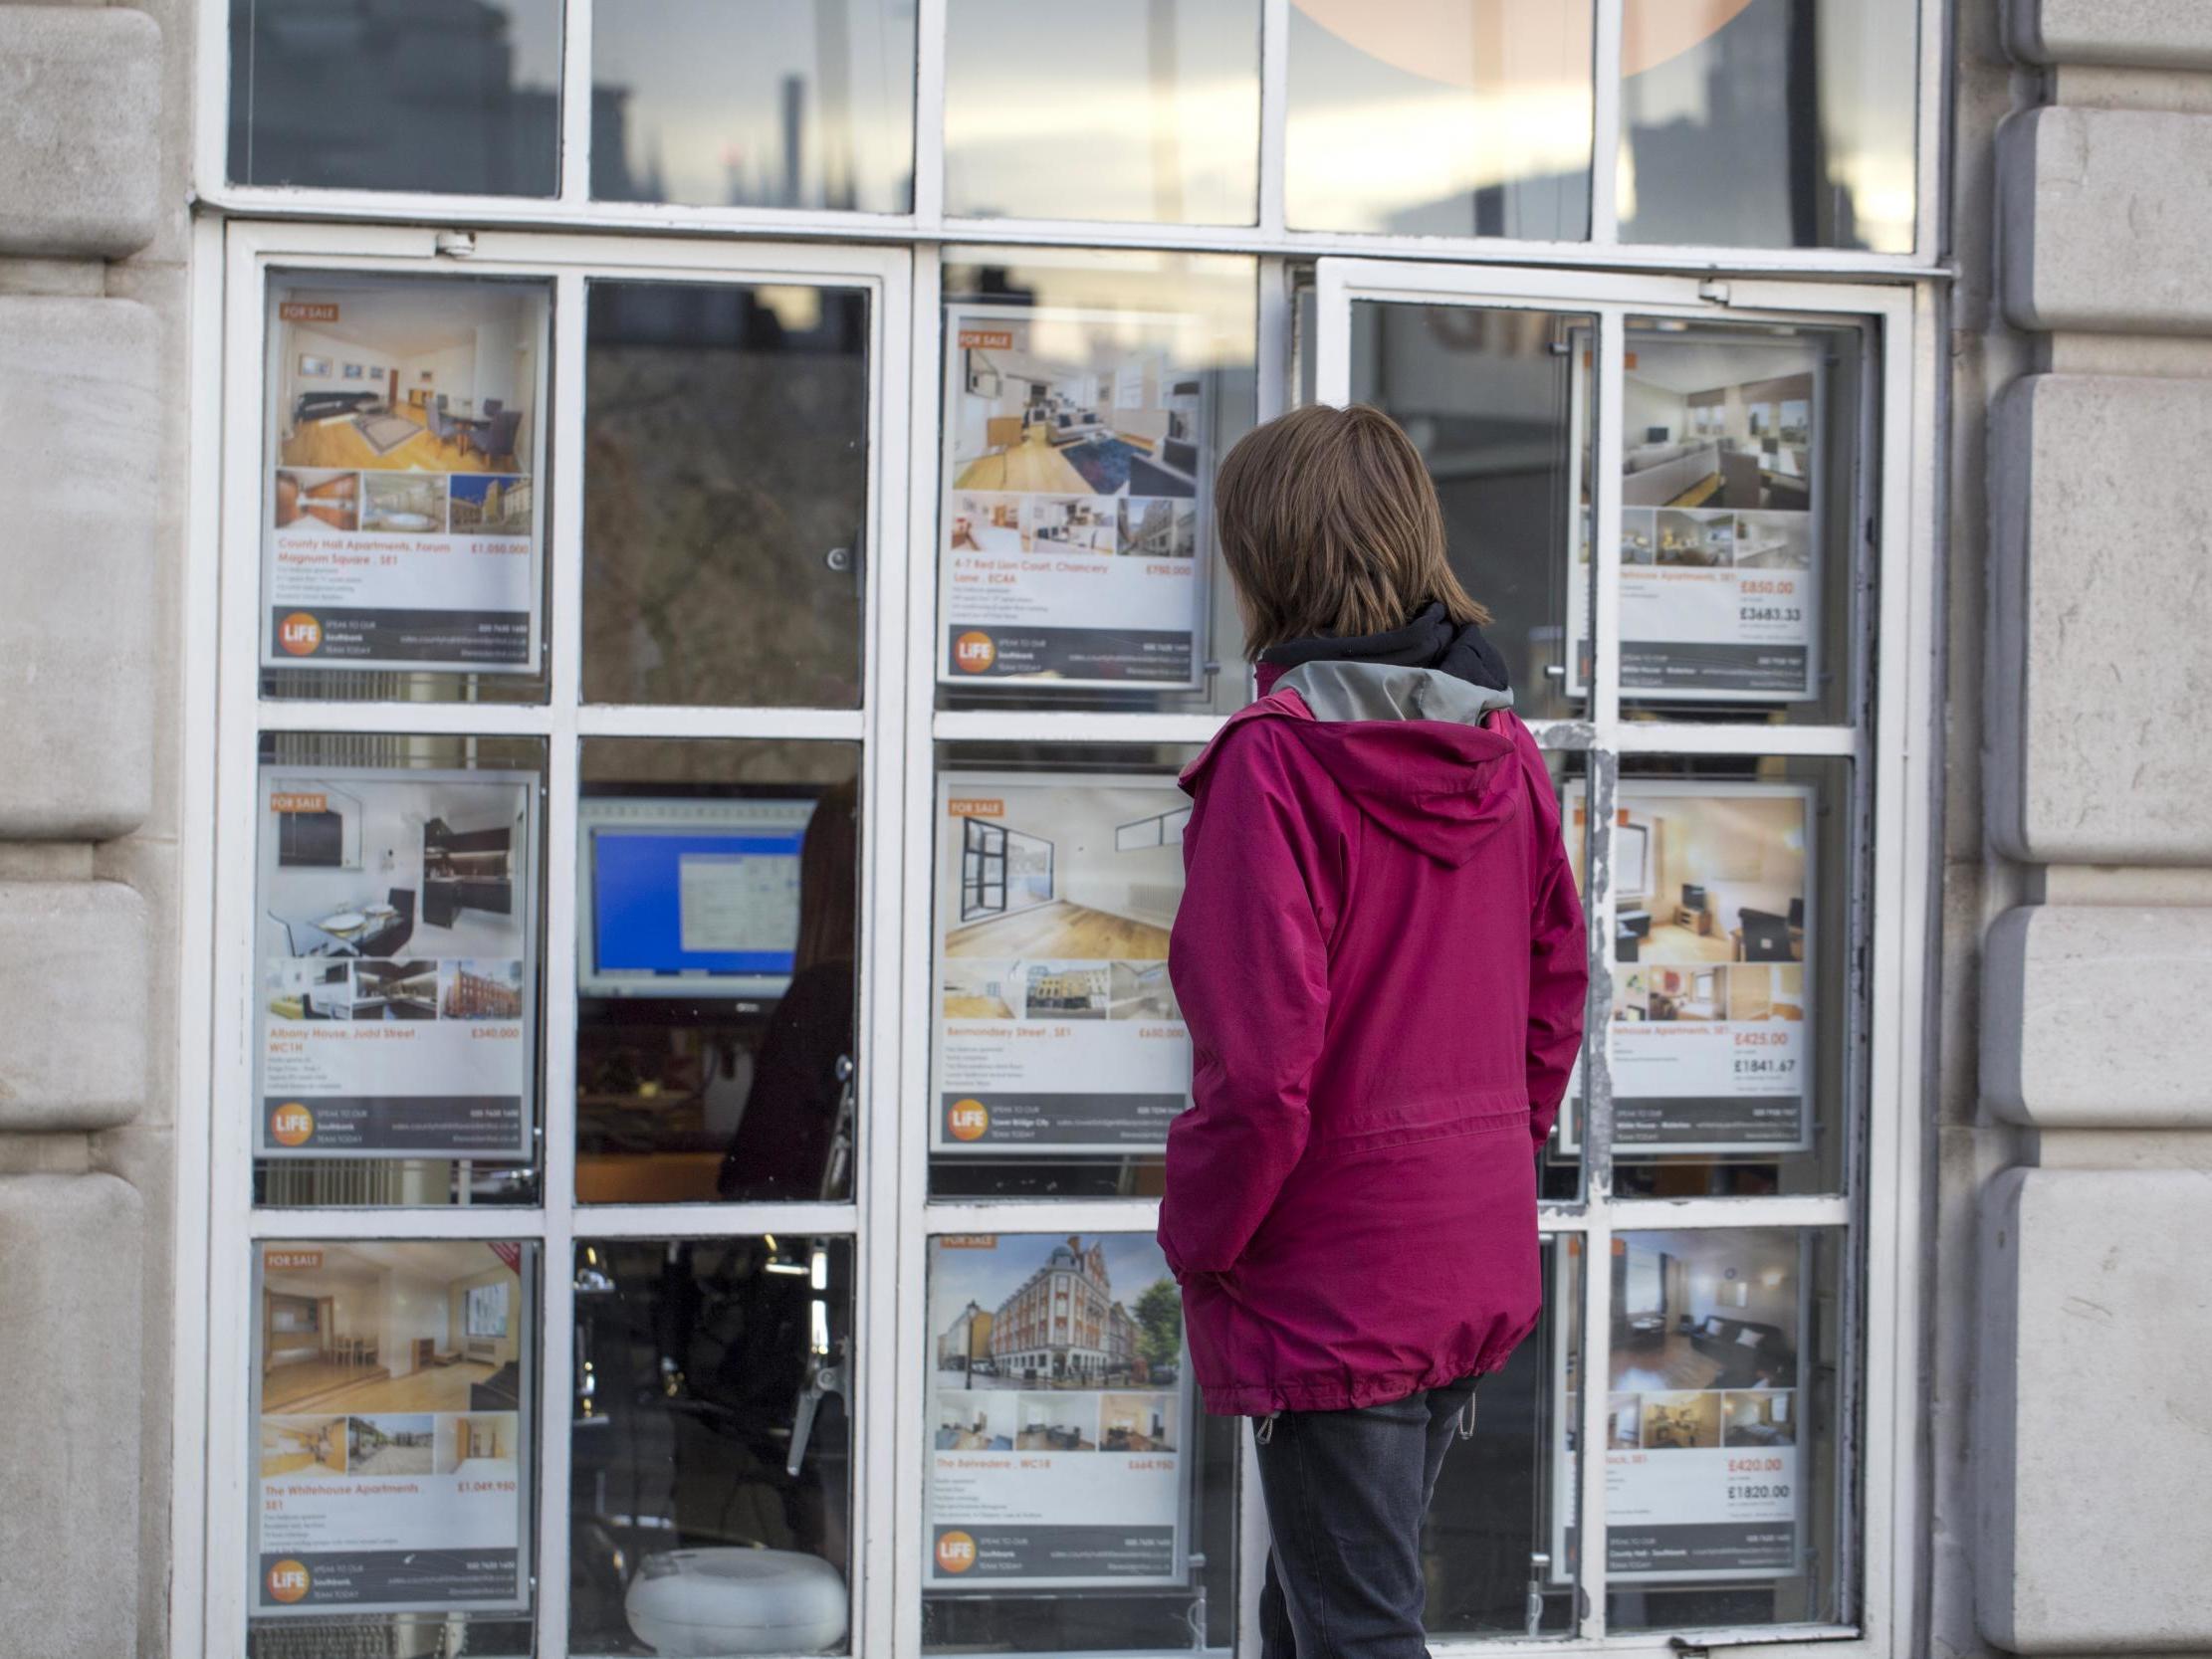 Millions of people find their current homes 'stressful', a survey suggests